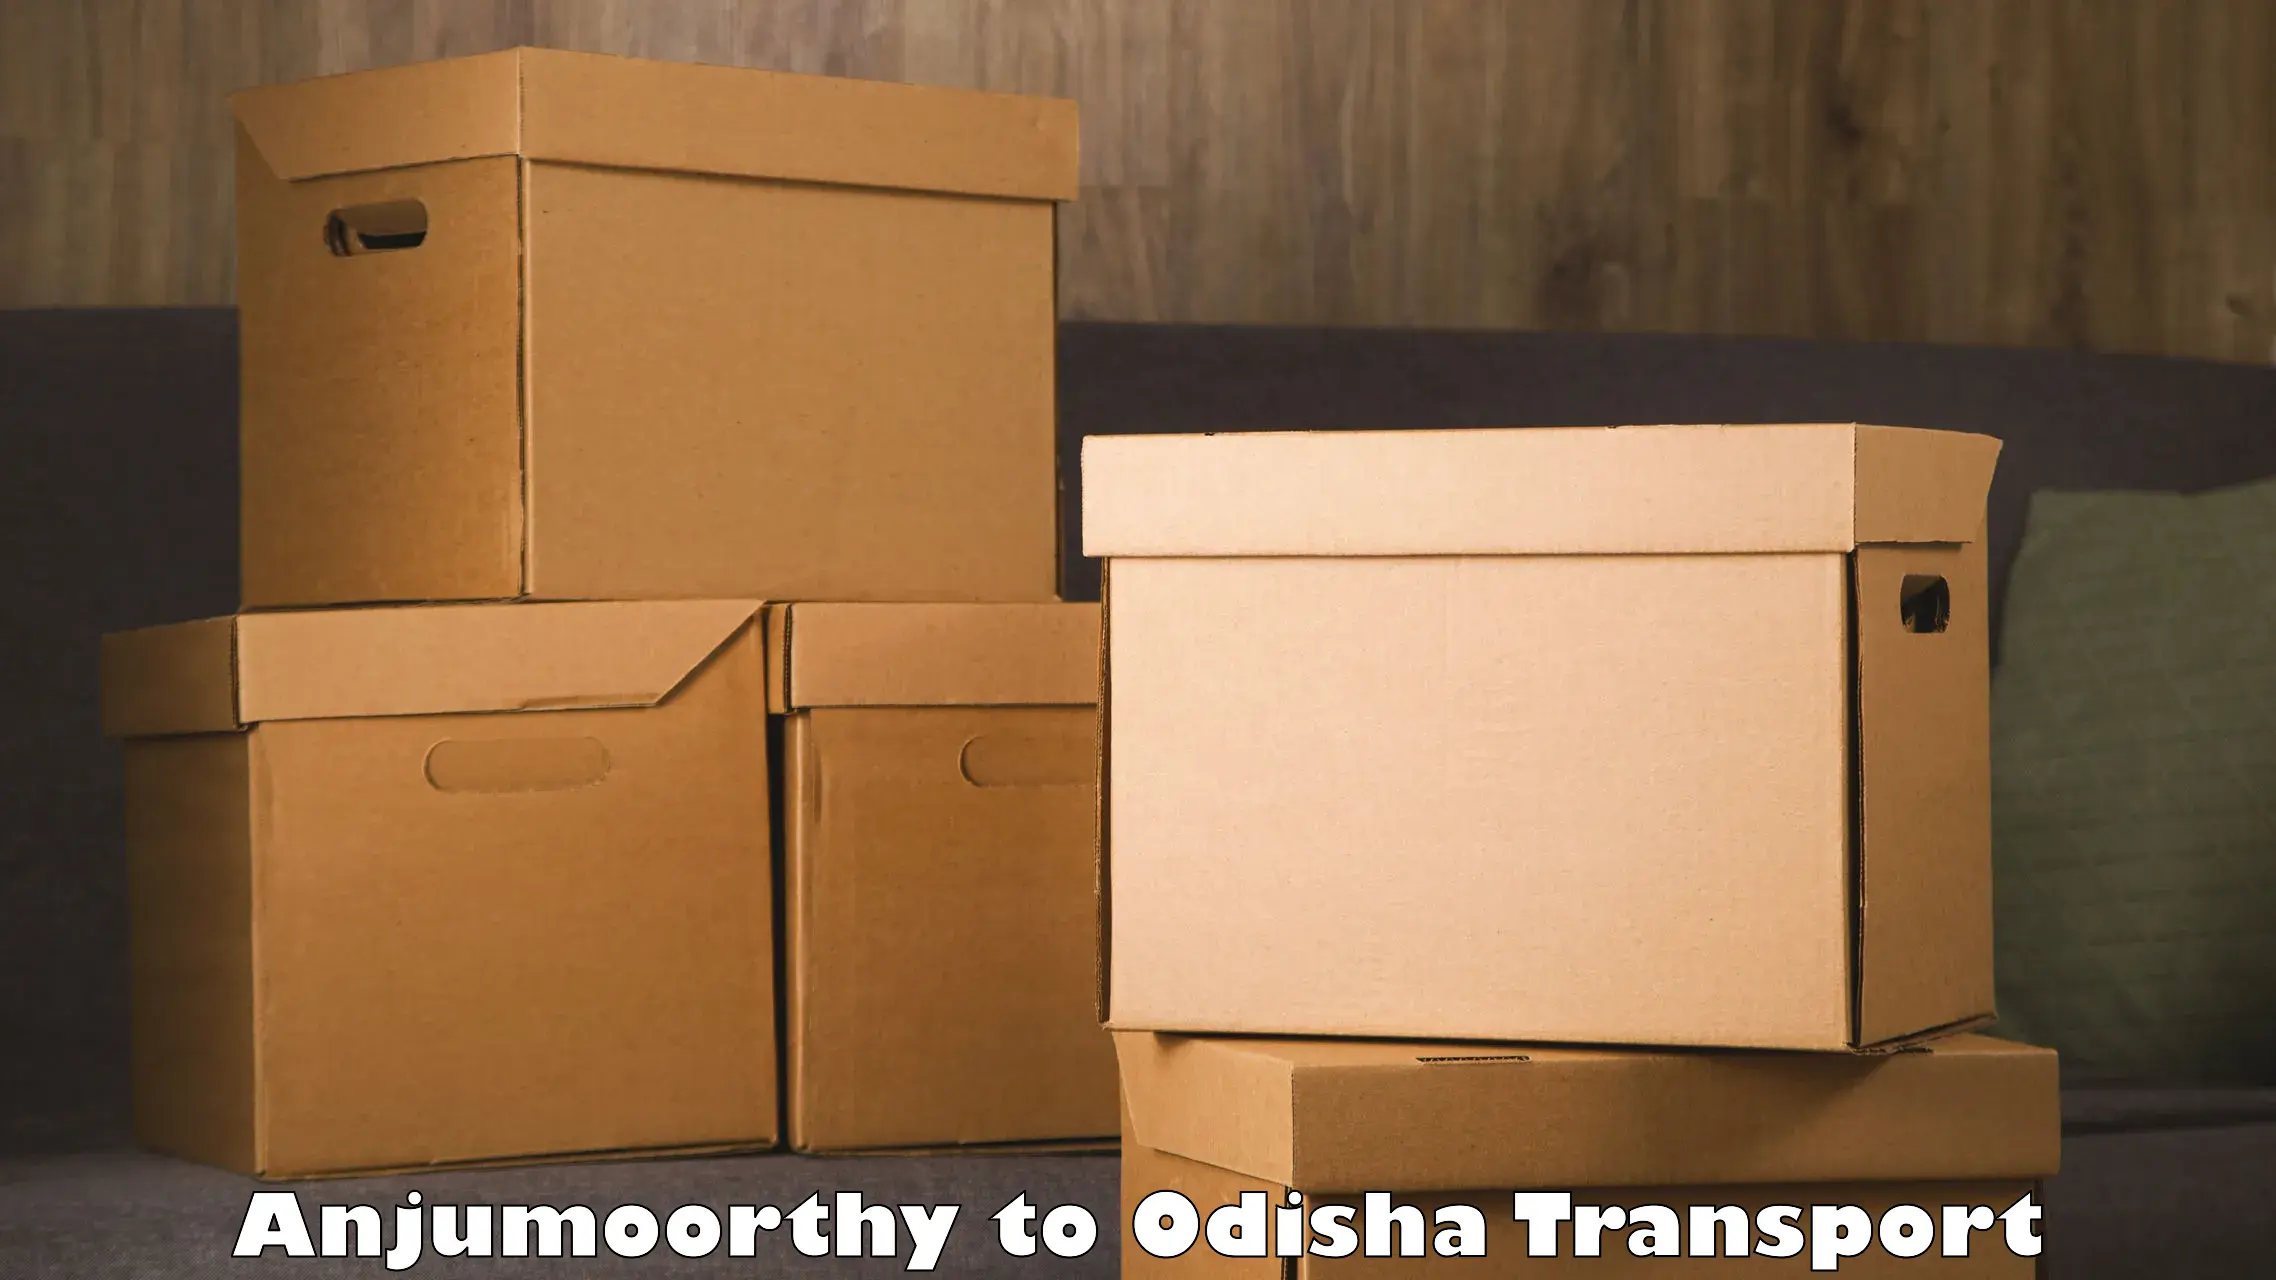 Package delivery services Anjumoorthy to Daspalla